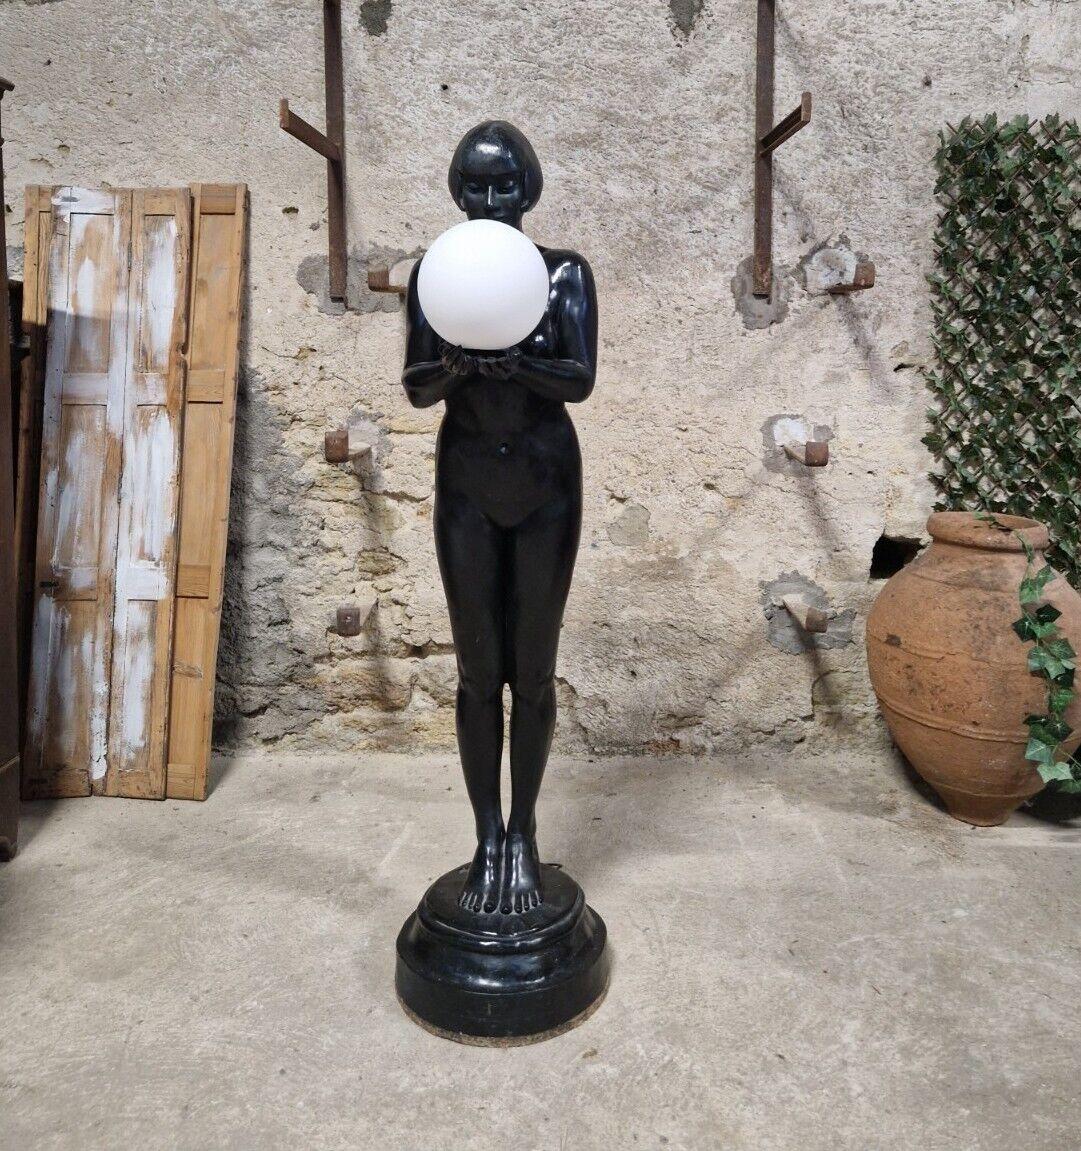 We are delighted to offer for sale this Fabulous Art Deco Floor Lamp

Nude Female holding a Ball in cupped hands
EU Wired Wiring Untested (working)
Painted in the original Black lacquer
Plaster Nude Female
Ball Shade is a later addition (replacing